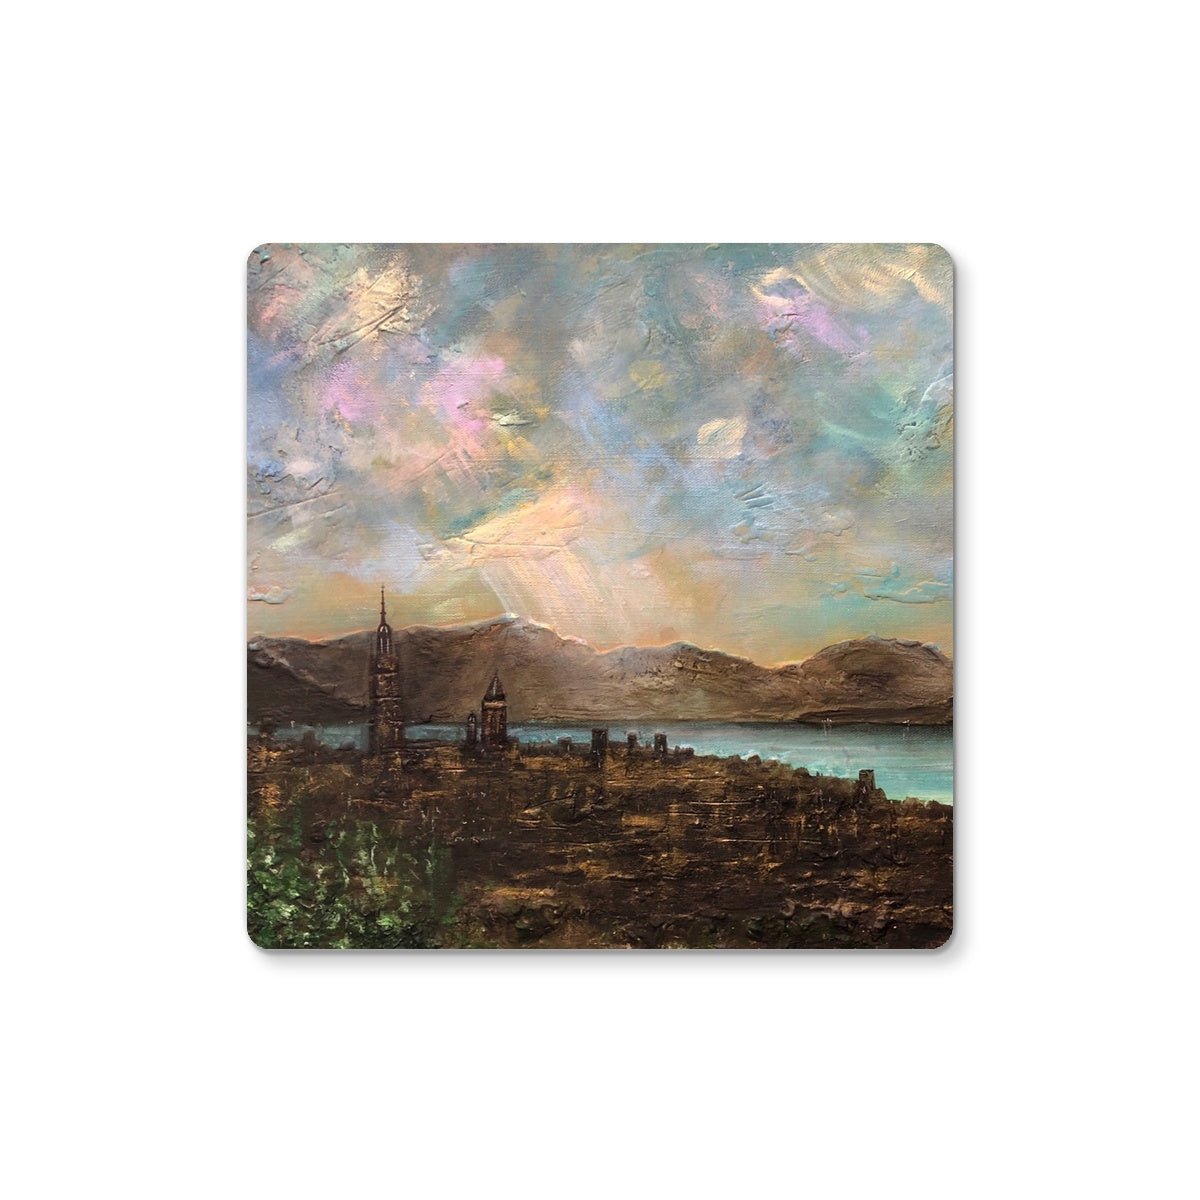 Angels Fingers Over Greenock Art Gifts Coaster-Coasters-River Clyde Art Gallery-6 Coasters-Paintings, Prints, Homeware, Art Gifts From Scotland By Scottish Artist Kevin Hunter